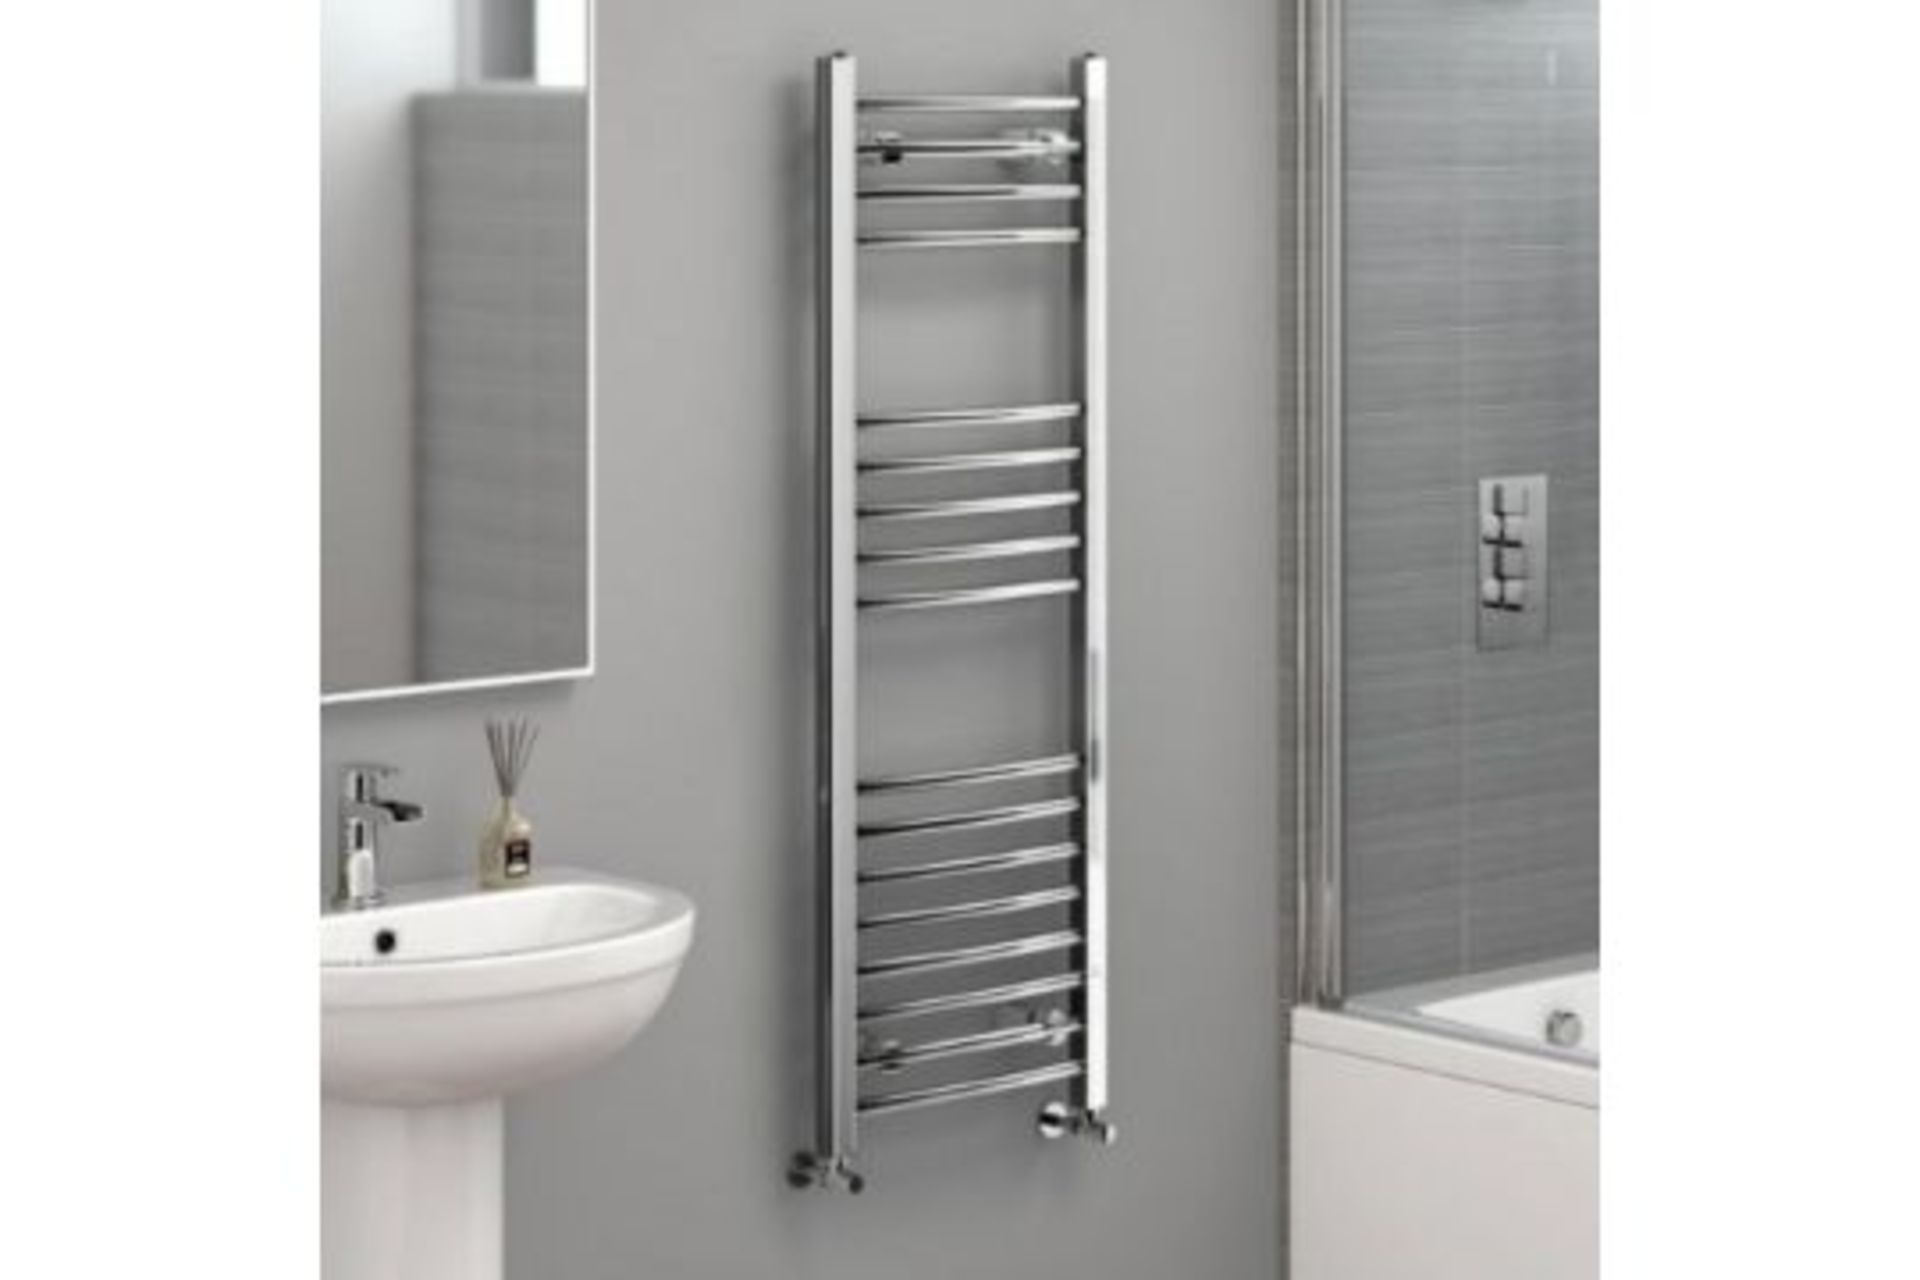 NEW & BOXED 1200x400mm - 20mm Tubes - Chrome Curved Rail Ladder Towel Radiator. NC1200400.Our ... - Image 3 of 3